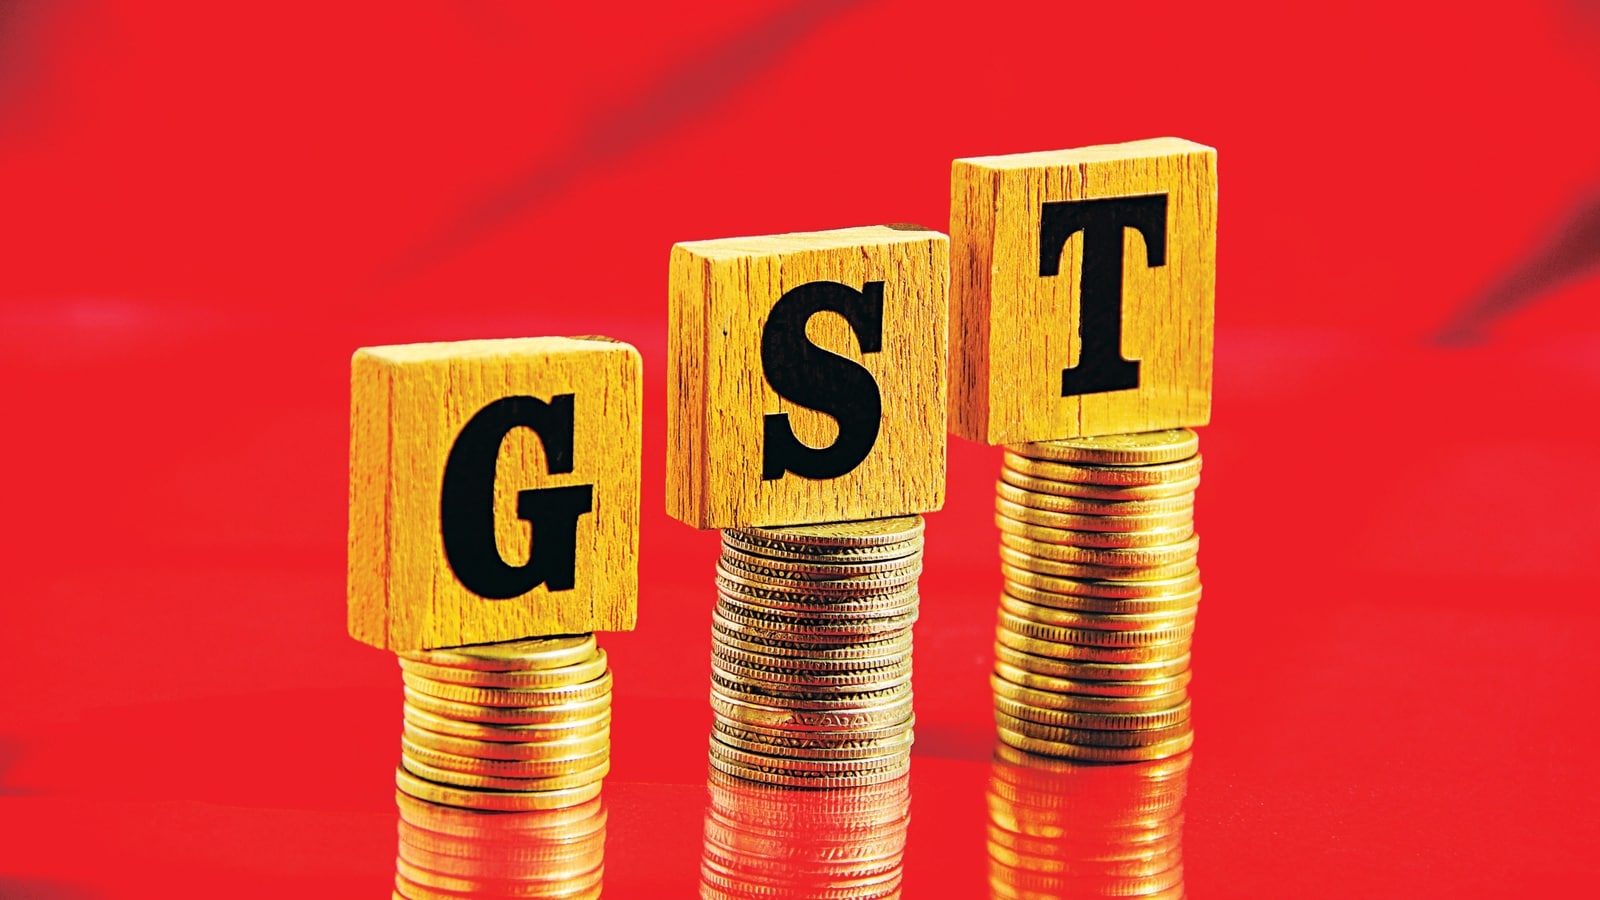 At ₹1.87 lakh crore, GST continues to impress